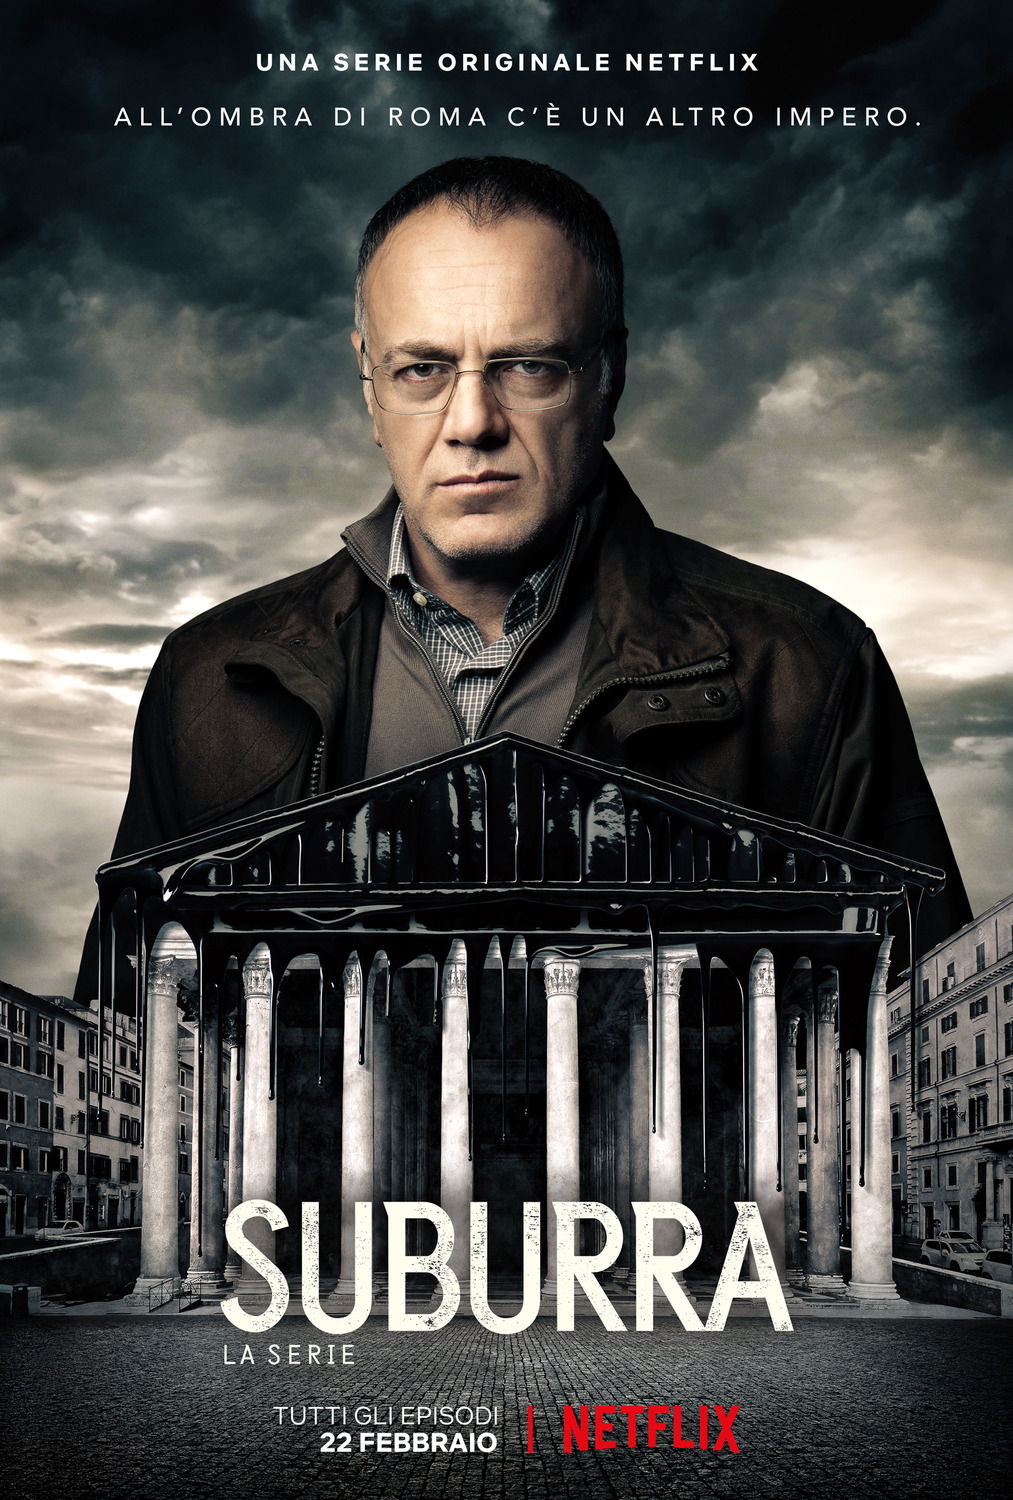 Extra Large TV Poster Image for Suburra: la serie (#11 of 12)